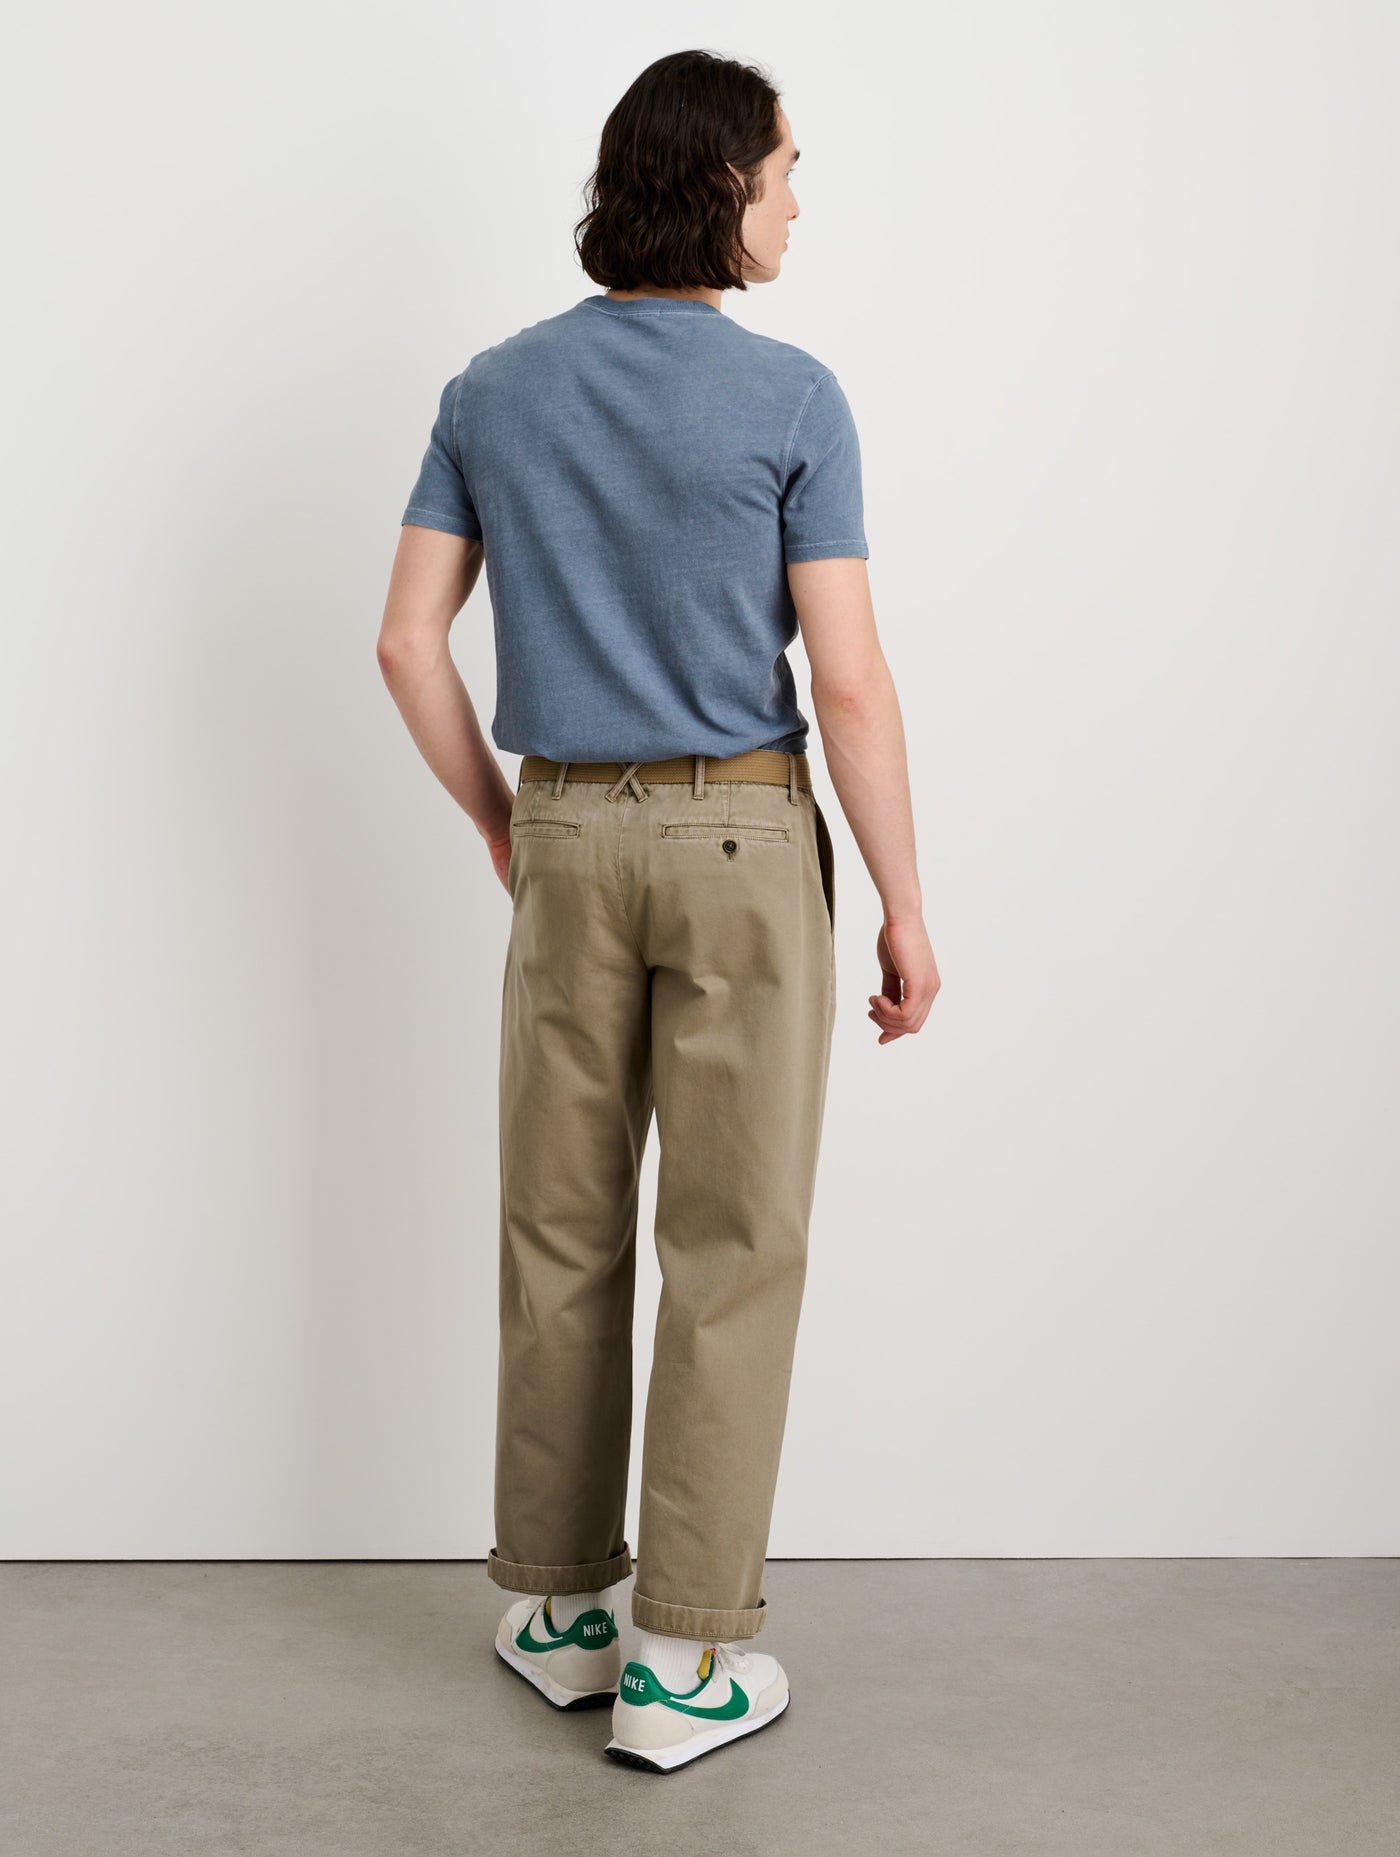 Straight Leg Pant in Vintage Washed Chino